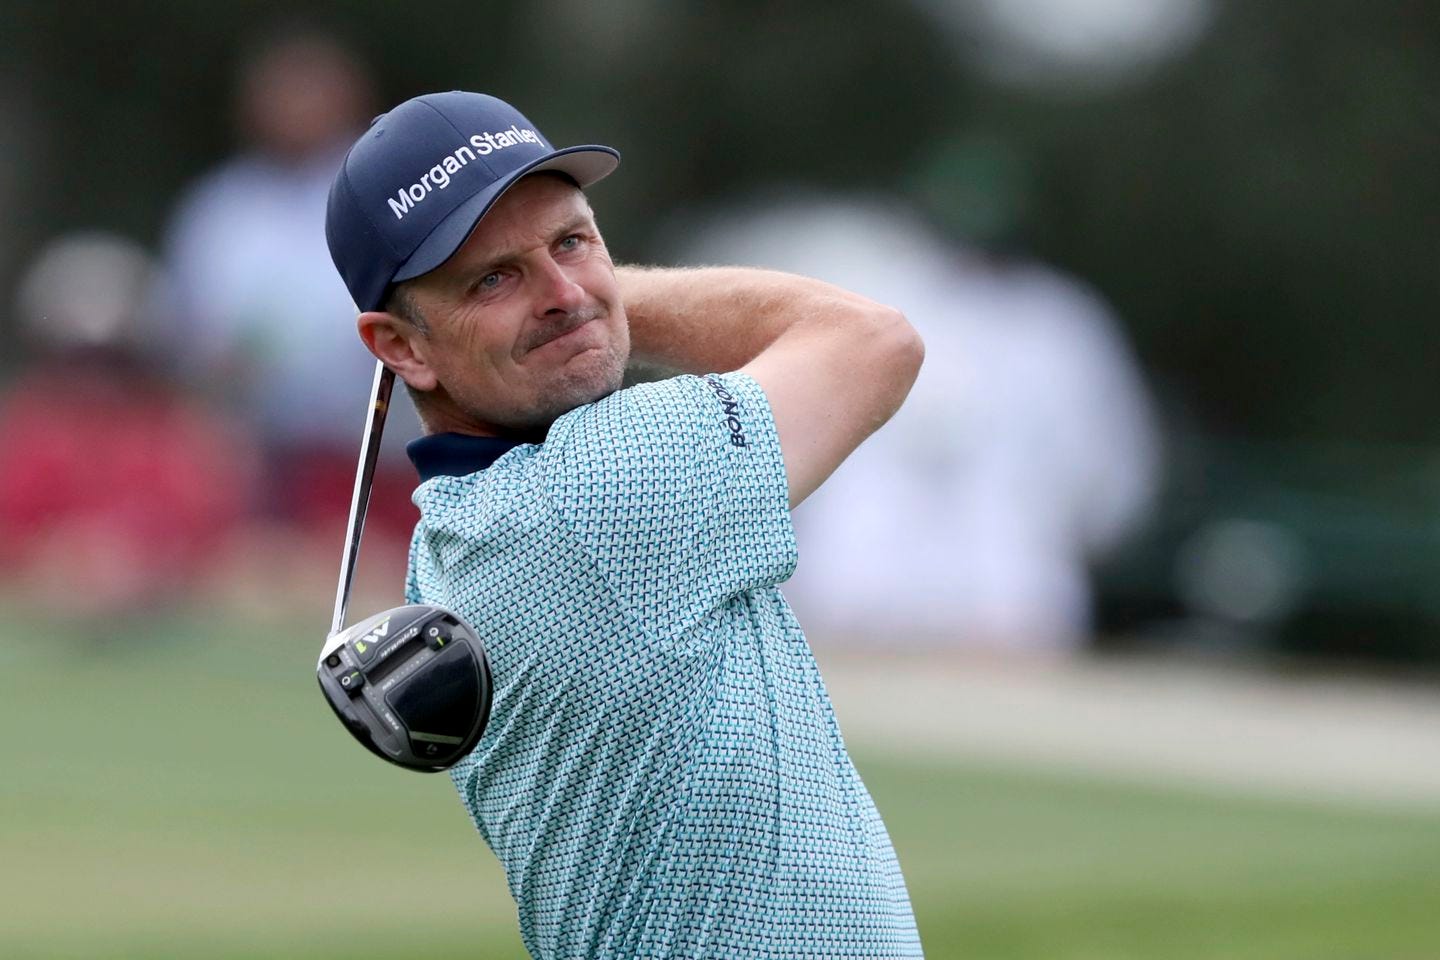 Justin Rose had birdies on the par 5s on the back nine and made a 20-foot birdie putt on the 16th hole on Friday.